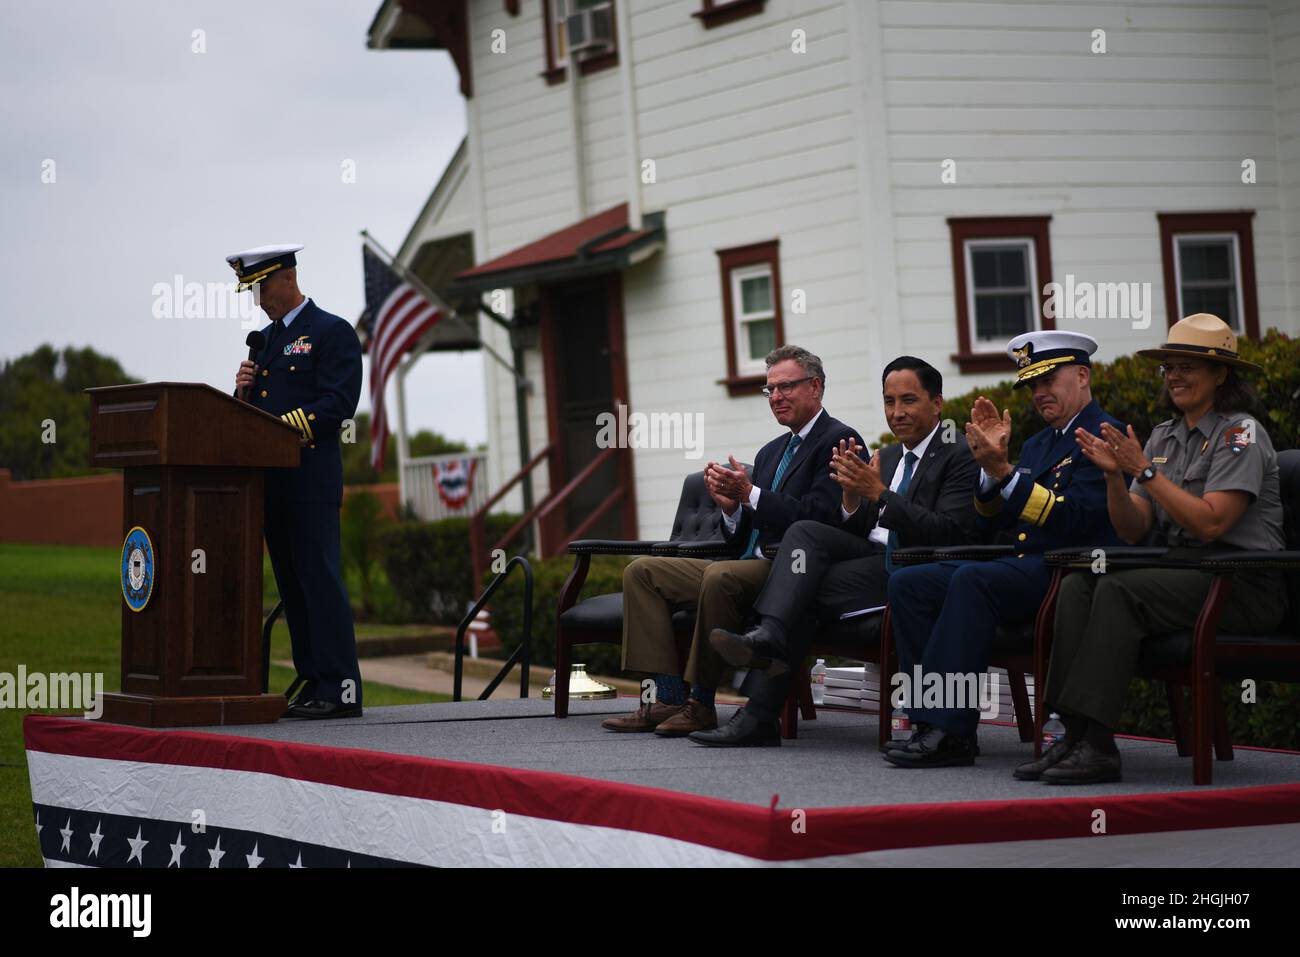 Capt. Timothy J. Barelli, Commanding Officer of U.S. Coast Guard Sector San Diego, speaks while the official party claps during the rededication ceremony at the New Point Loma Lighthouse in San Diego, August 20, 2021. The rededication is the official recognition of the light station's service career and honors its history as a Coast Guard navigational aid. Stock Photo